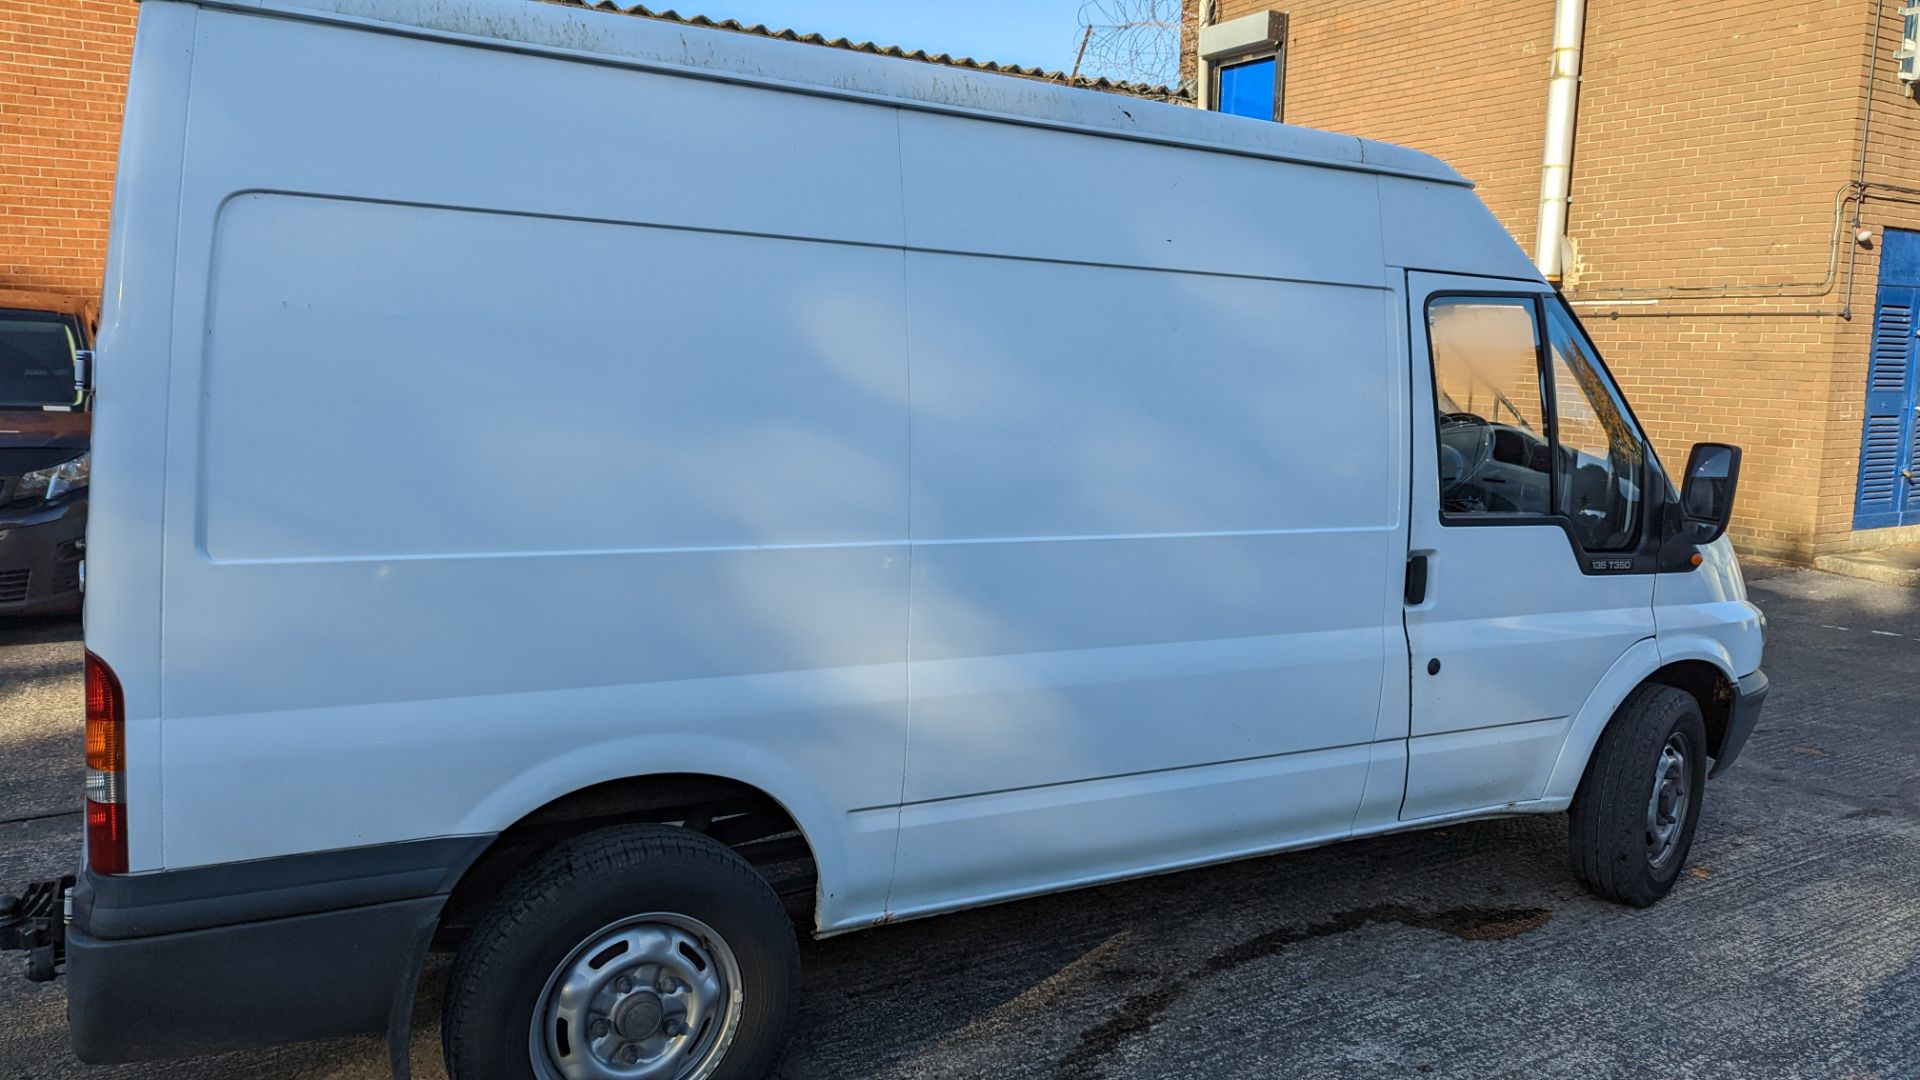 CU06 FBC Ford Transit panel van, 6 speed manual gearbox, 2402cc diesel engine. Colour: white. Fir - Image 6 of 44